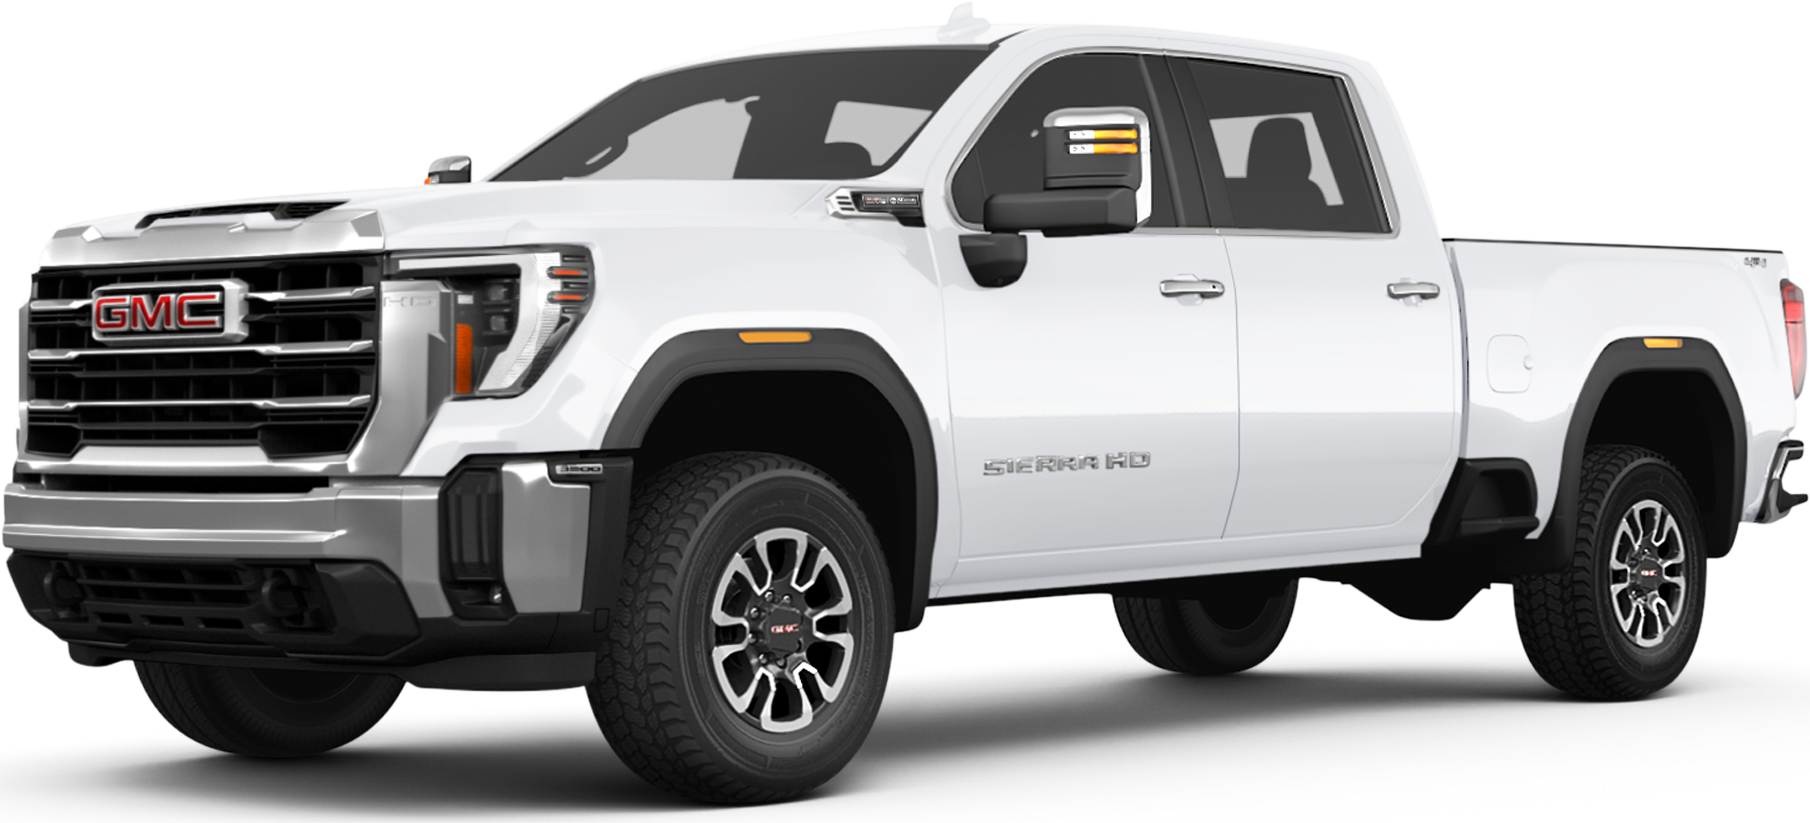 2024 GMC Sierra 3500 HD Crew Cab Price, Reviews, Pictures & More